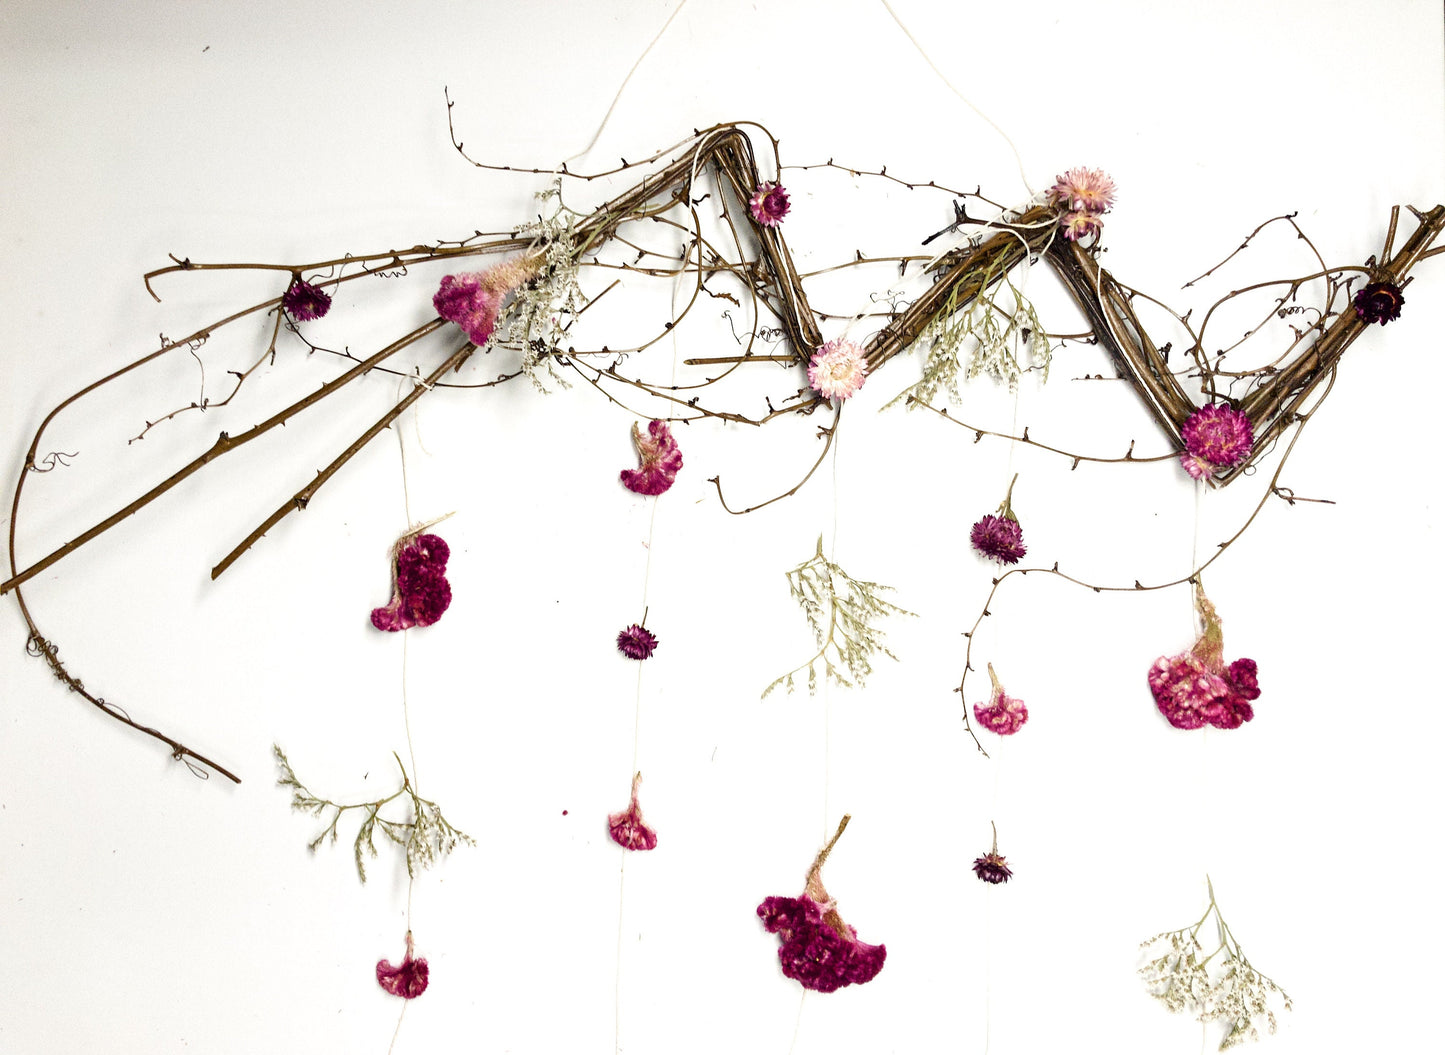 Floral Wall Decor, Dried Flowers, Art, Floral, Wall, Branches, Twigs, Preserved, Nursery, Bedroom Decor, Nook Decor, Rustic Farmhouse